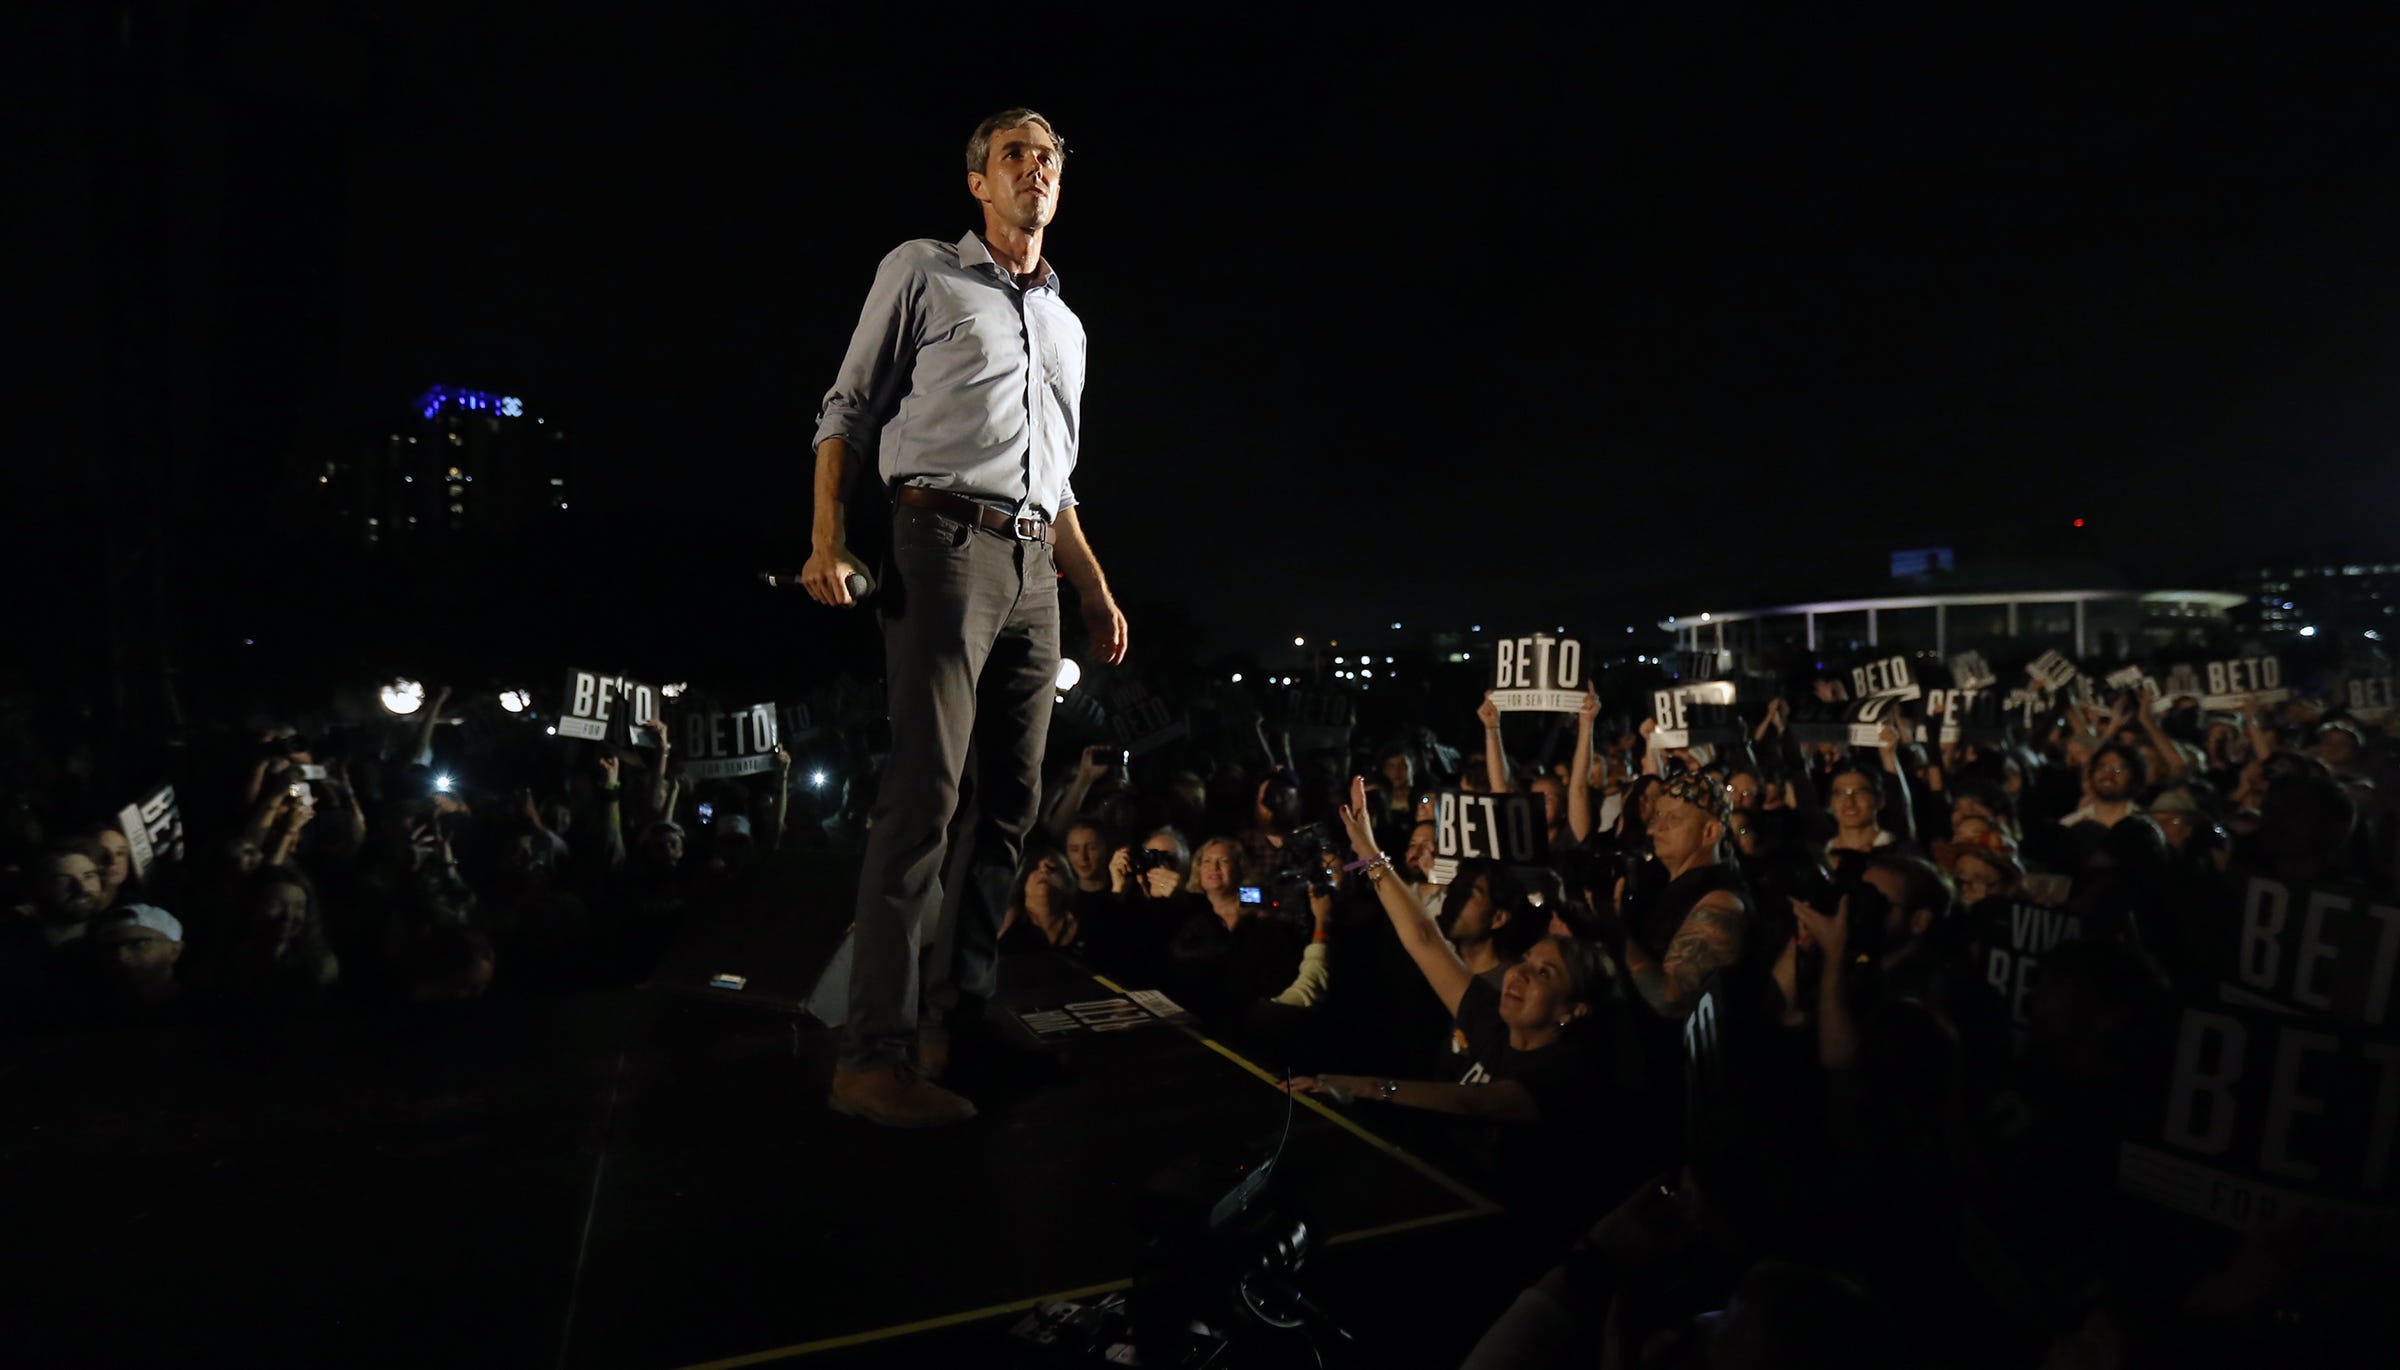 Beto O&apos;Rourke raises a whopping $38 million against Ted Cruz ahead of midterm elections